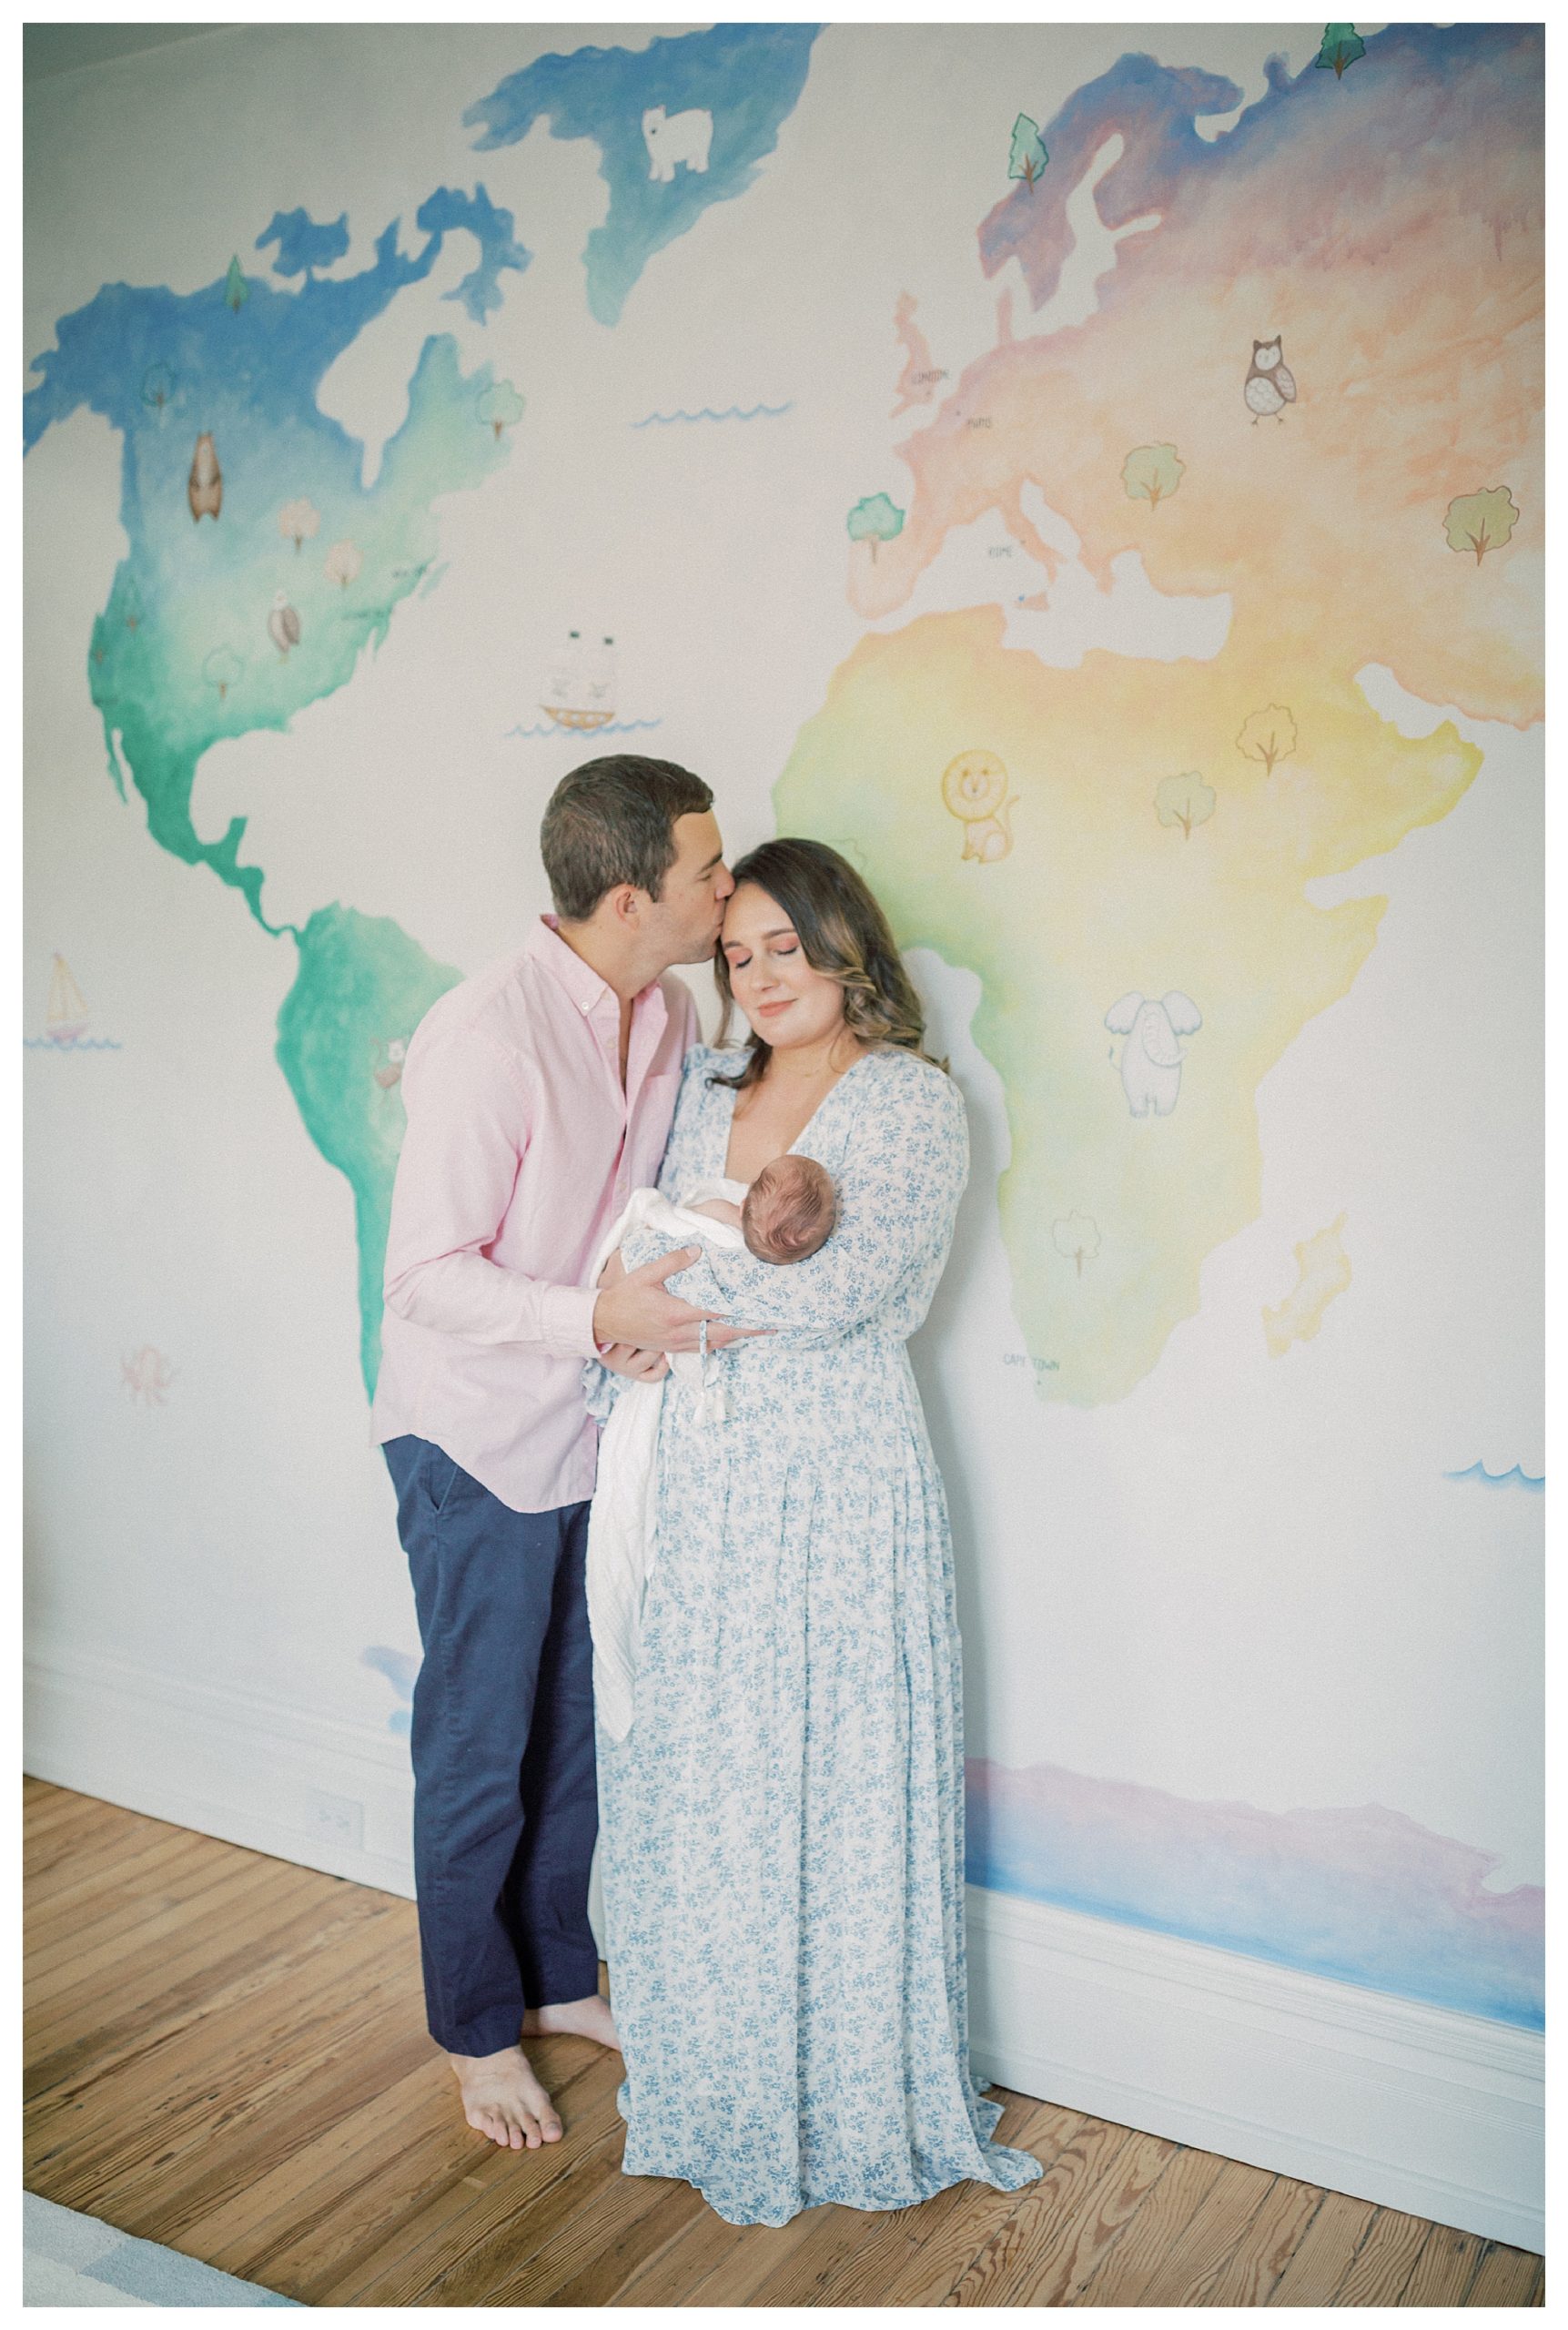 Father kisses mother's head while they stand in front of colorful mural in nursery, holding baby